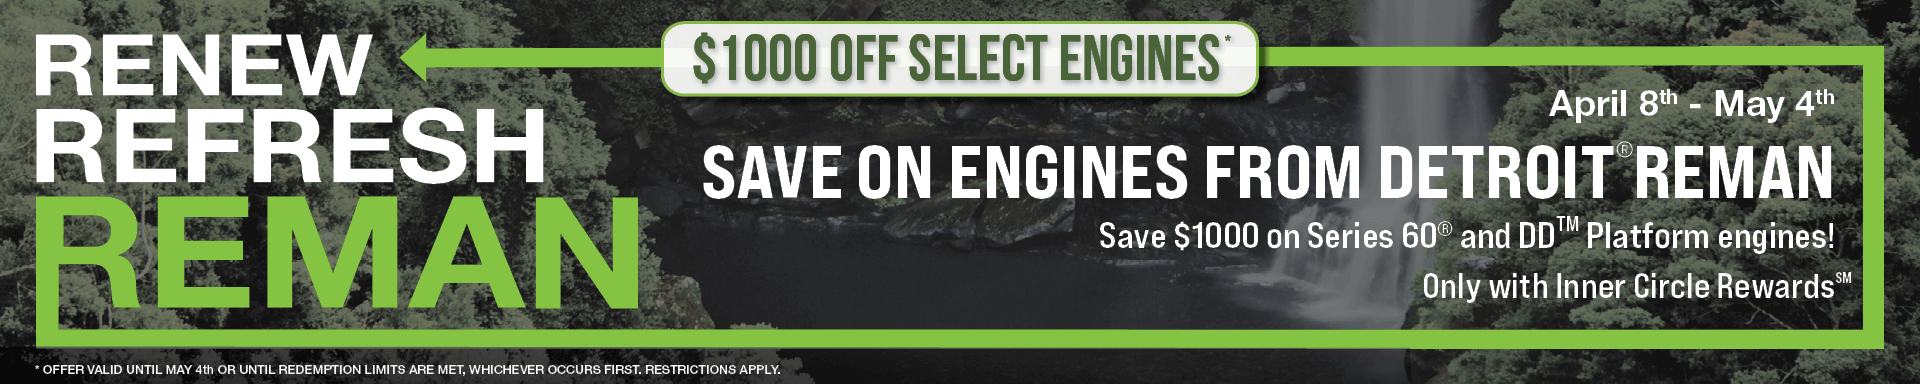 Save $1,000 on Detroit Reman Series 60 and DD platform engines. April 8 - May 4